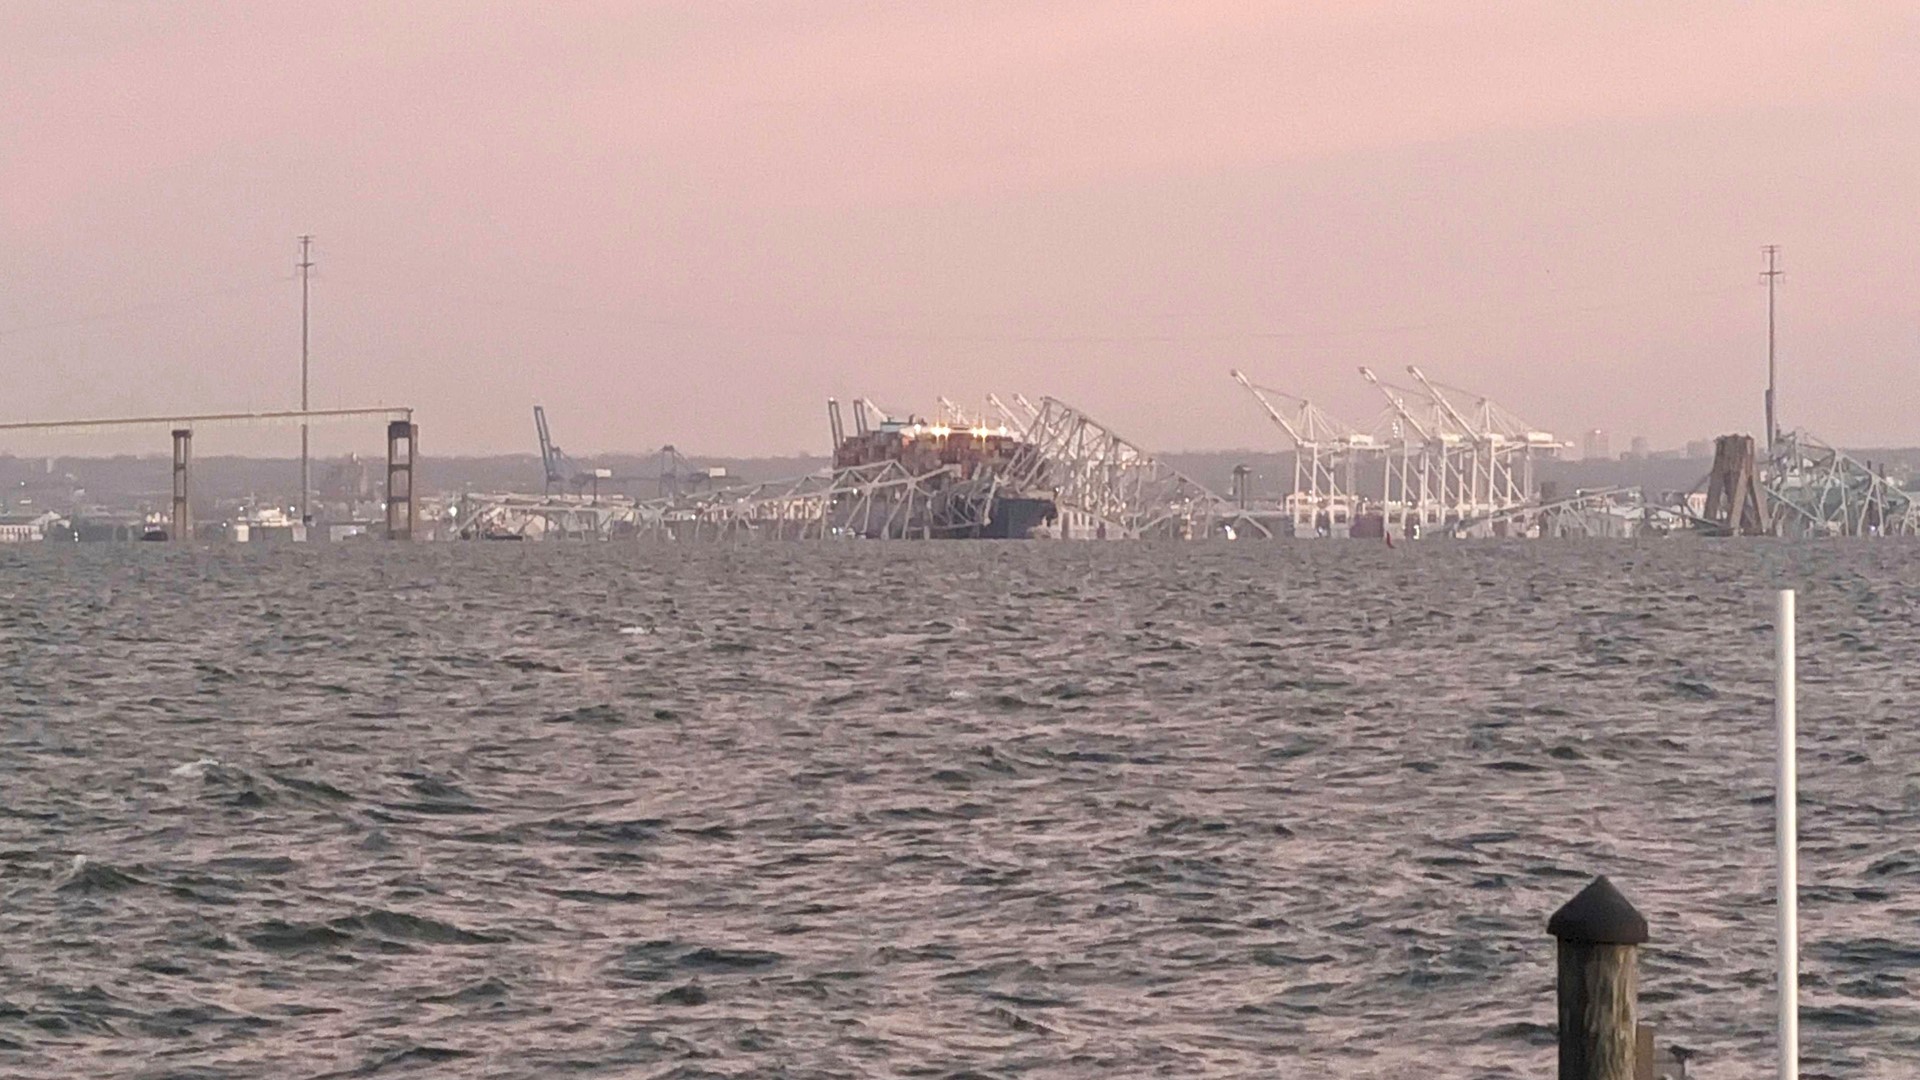 While the immediate rescue and recovery efforts are most important, the bridge collapse could also create problems for cruise ships heading home.